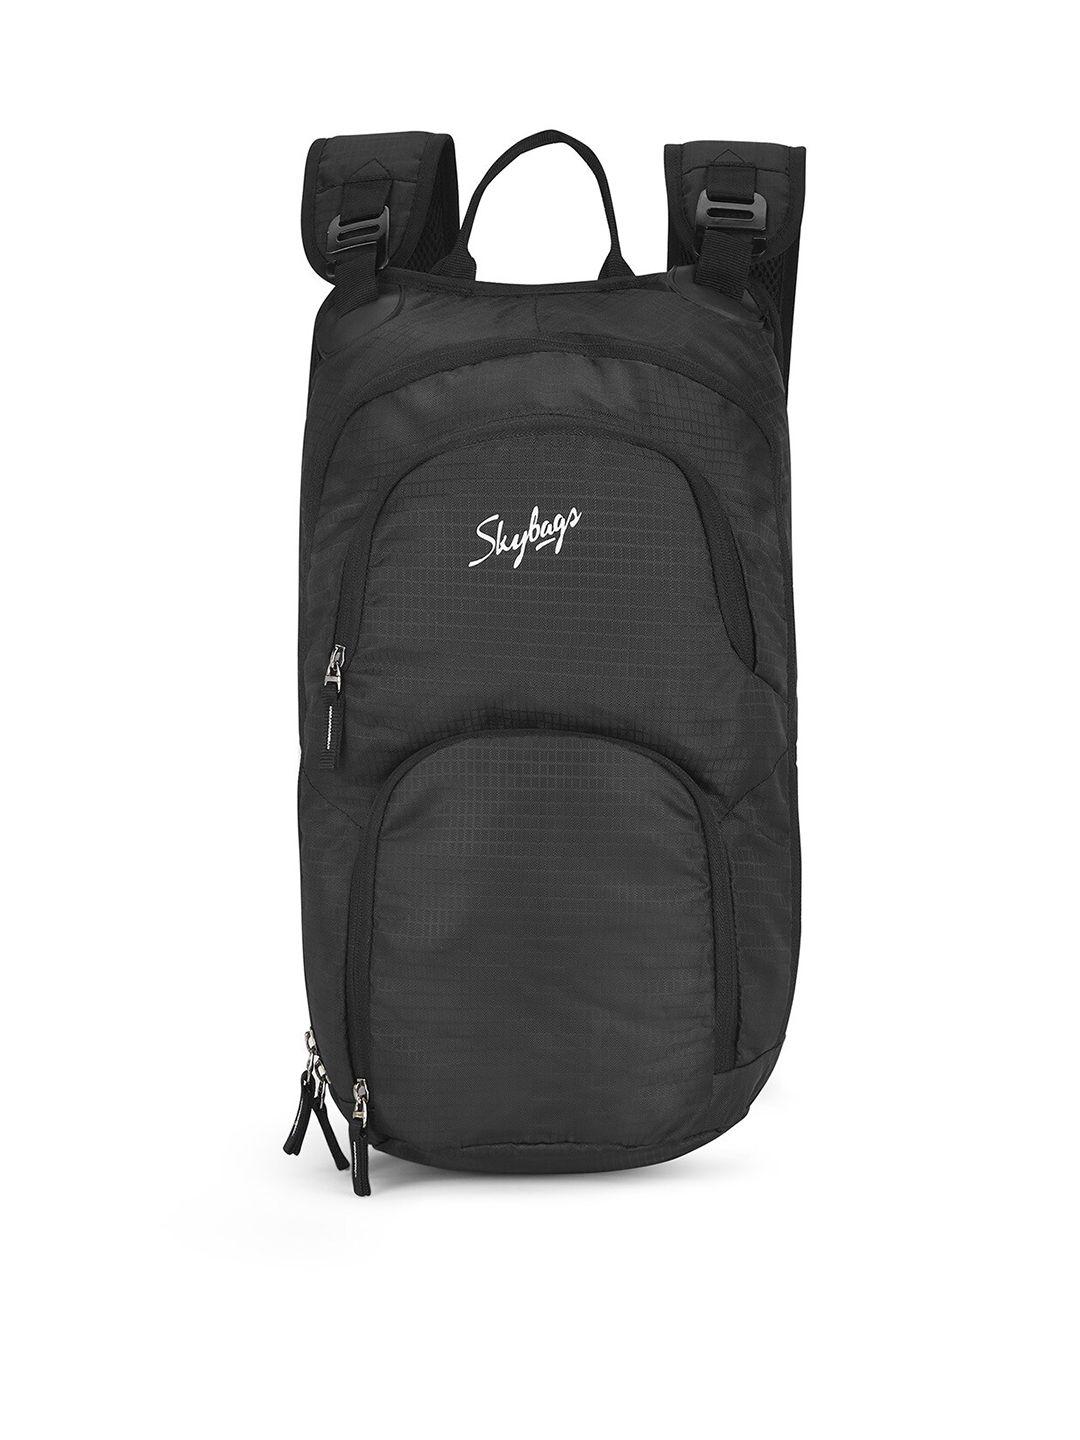 skybags unisex backpack